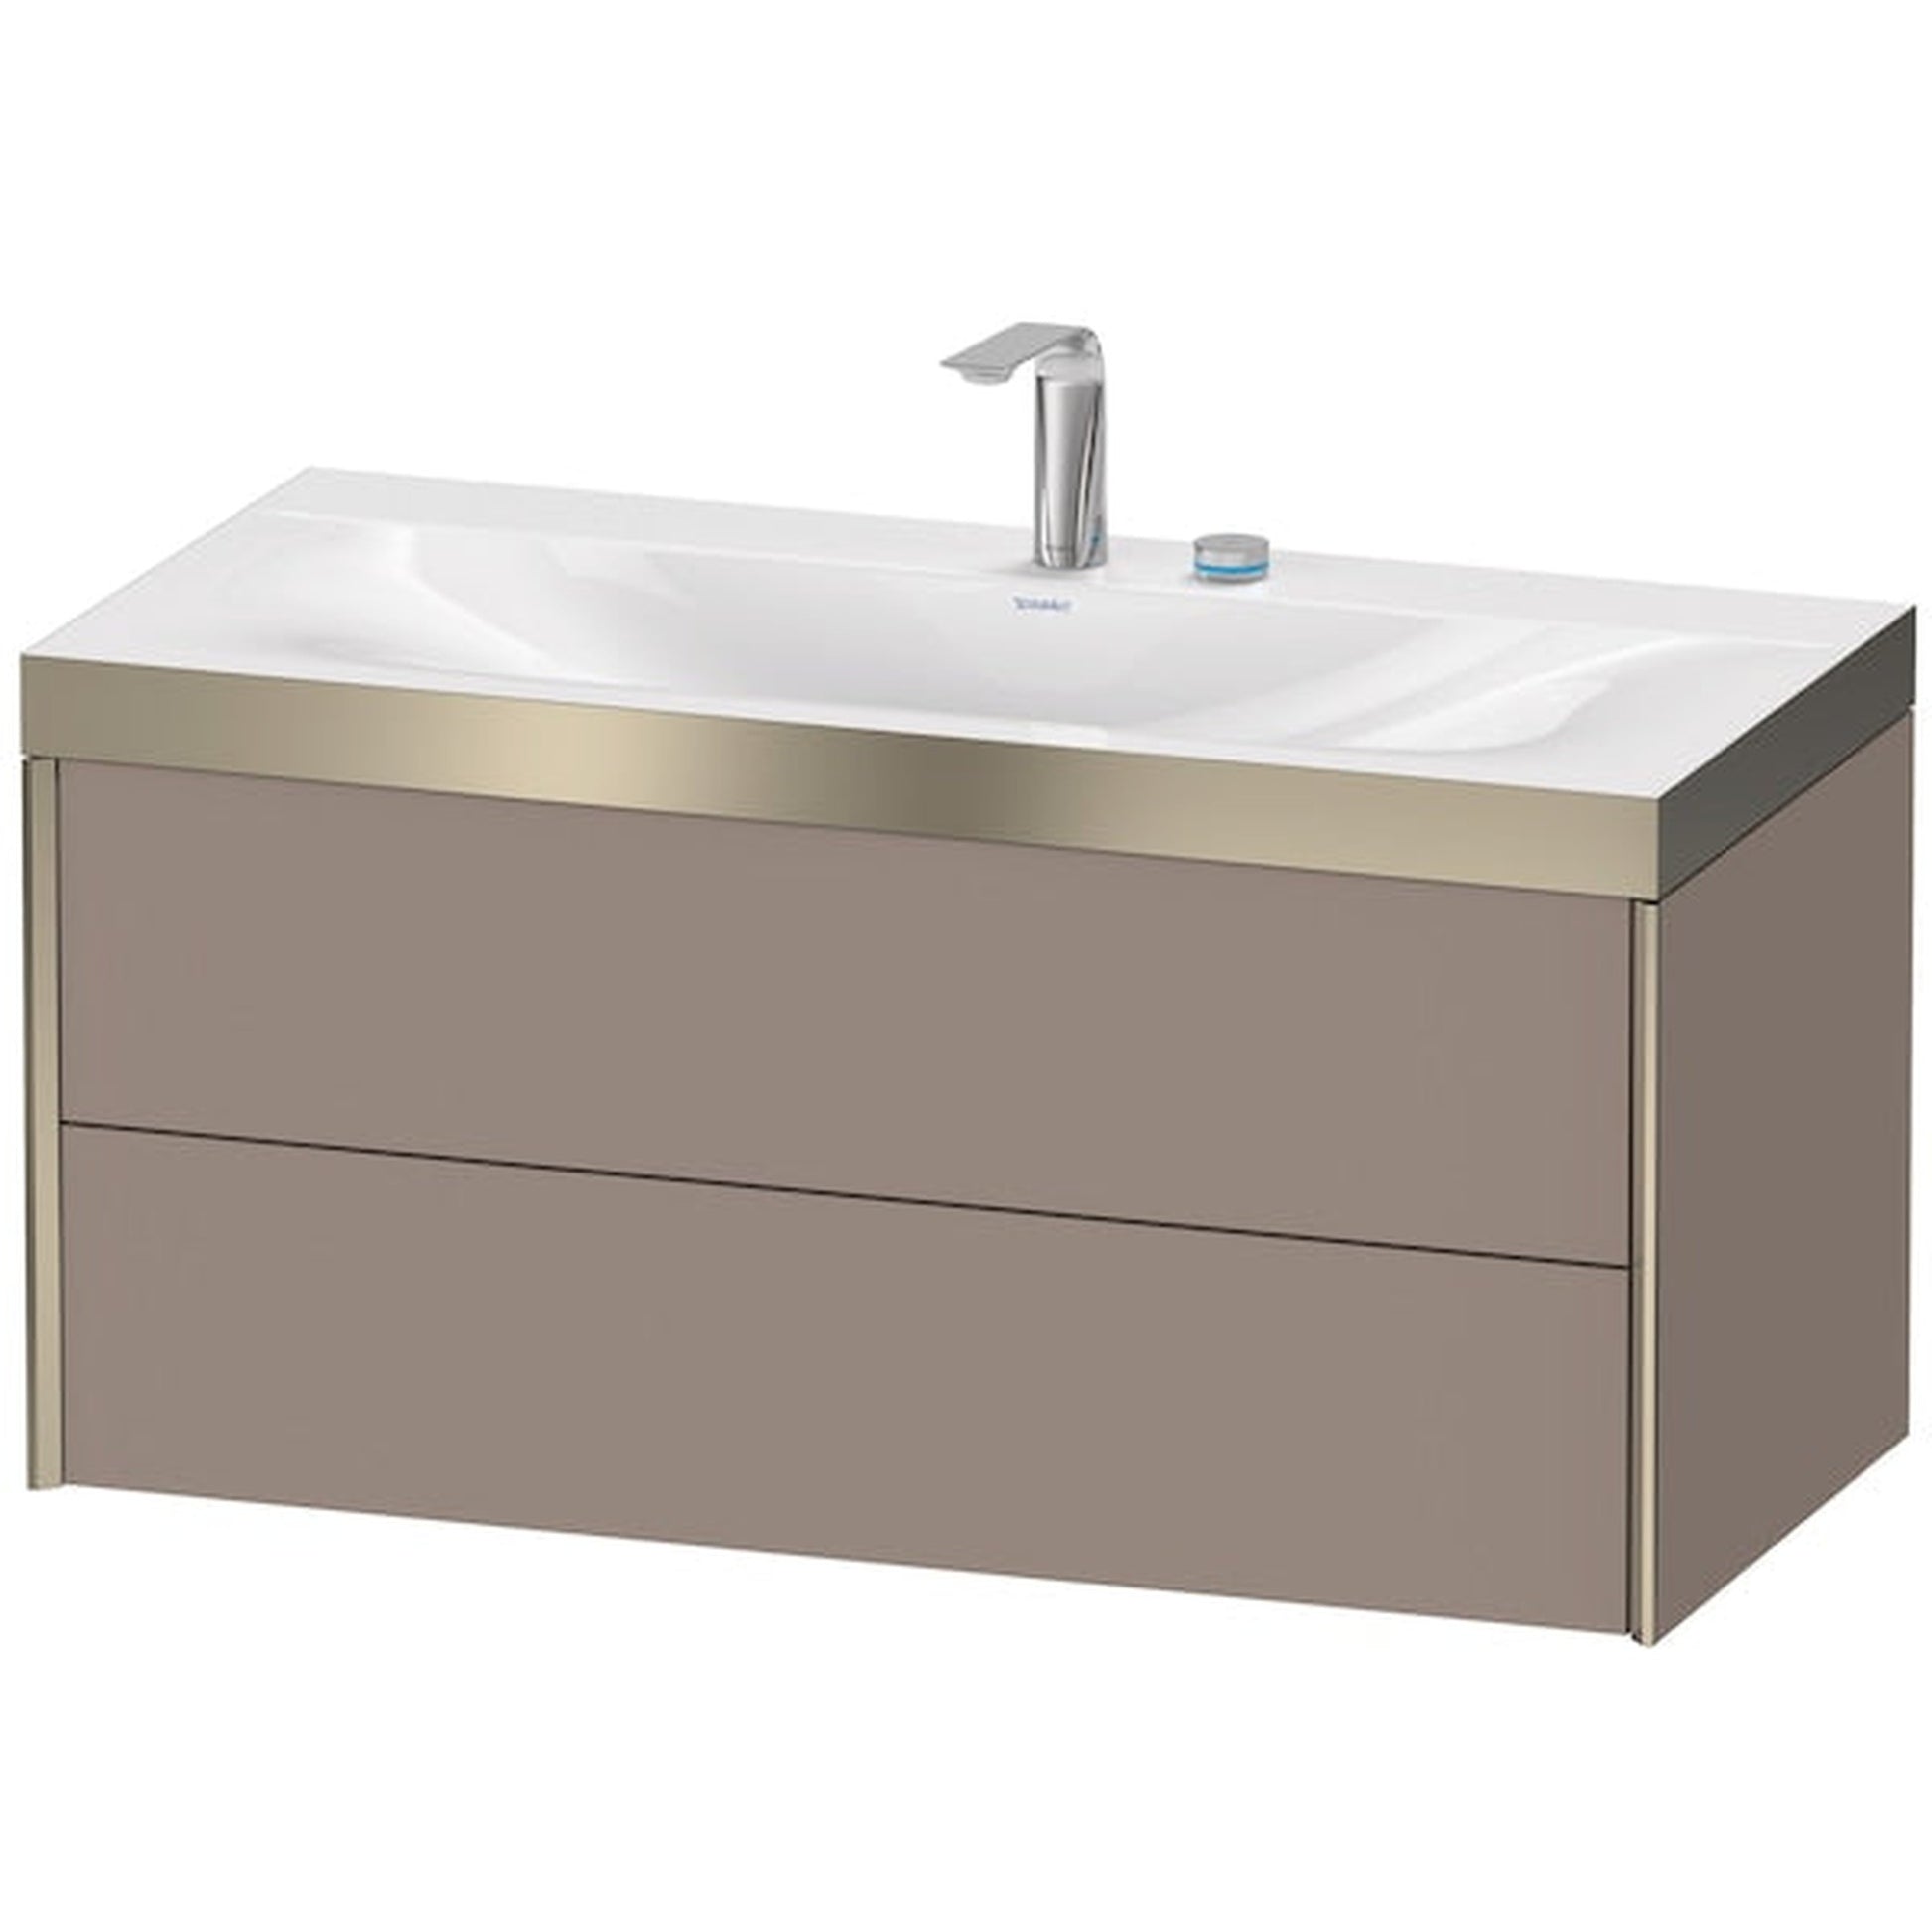 Duravit Xviu 39" x 20" x 19" Two Drawer C-Bonded Wall-Mount Vanity Kit With Two Tap Holes, Basalt (XV4616EB143P)